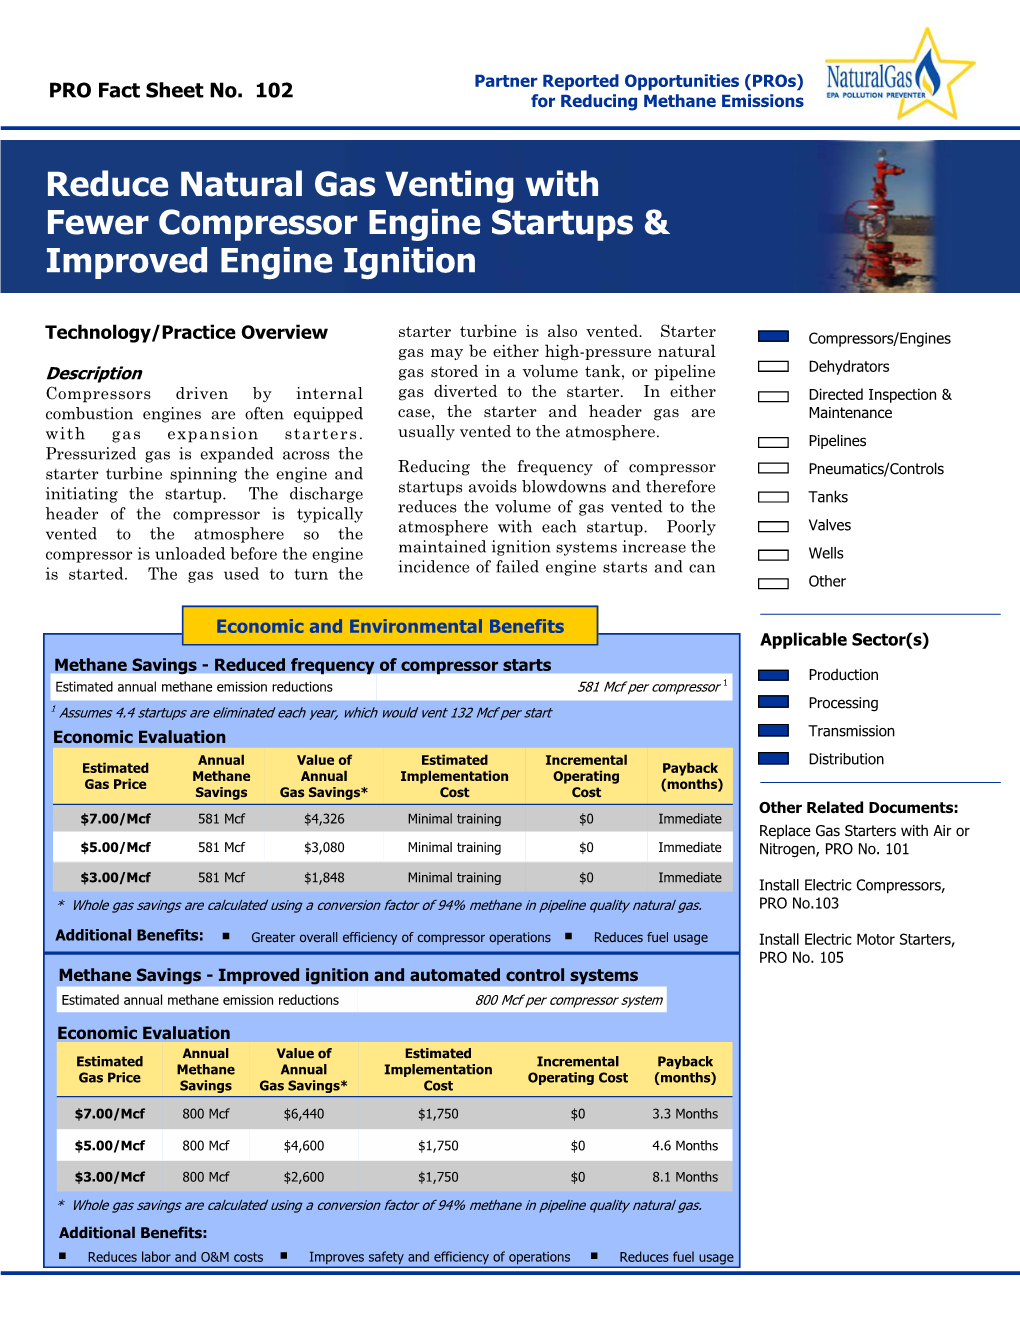 Reduce Natural Gas Venting with Fewer Compressor Engine Startups & Improved Engine Ignition